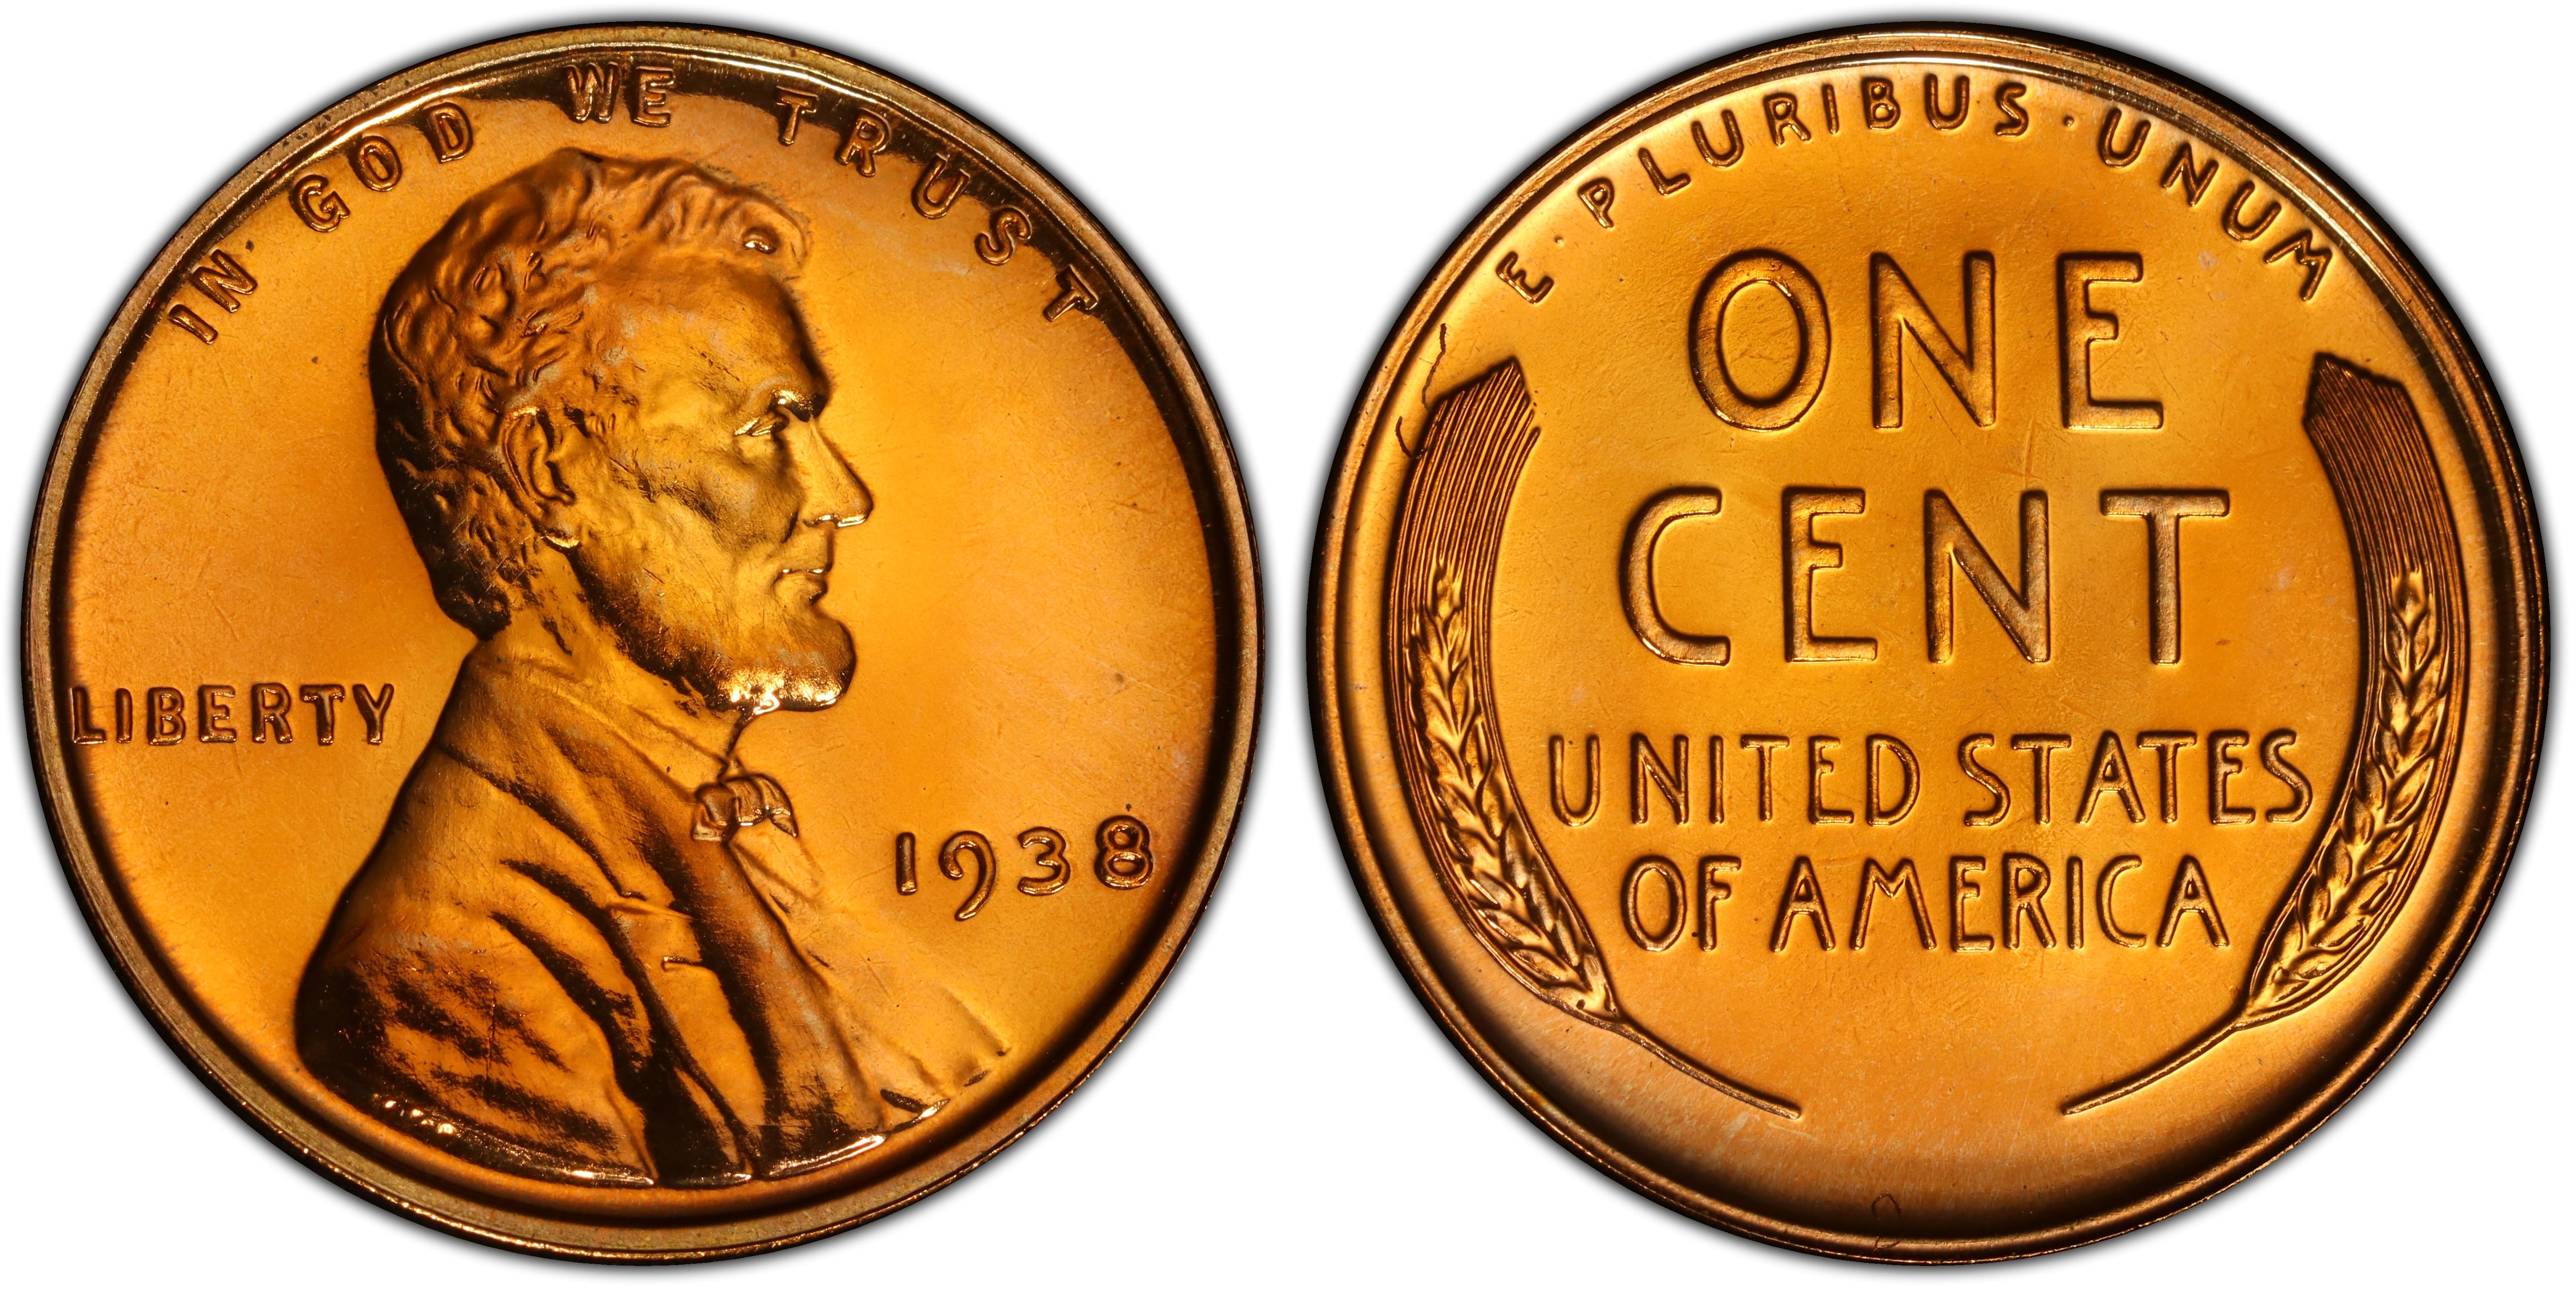 https://images.pcgs.com/CoinFacts/48793492_276982820_2200.jpg